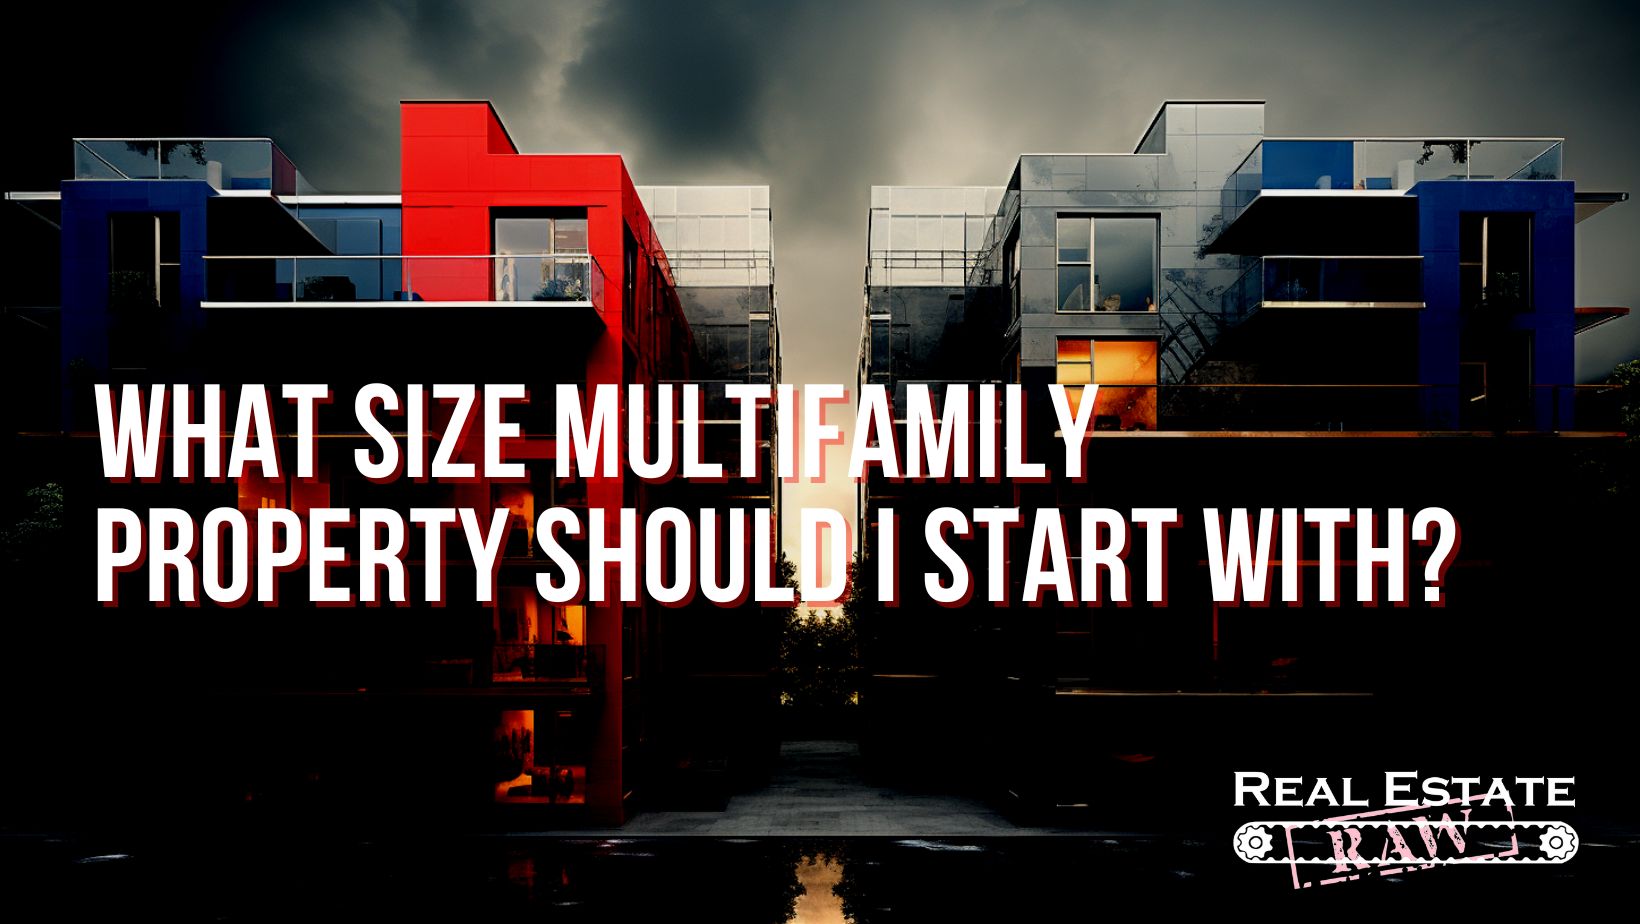 What Size Multifamily Property Should I Start With?